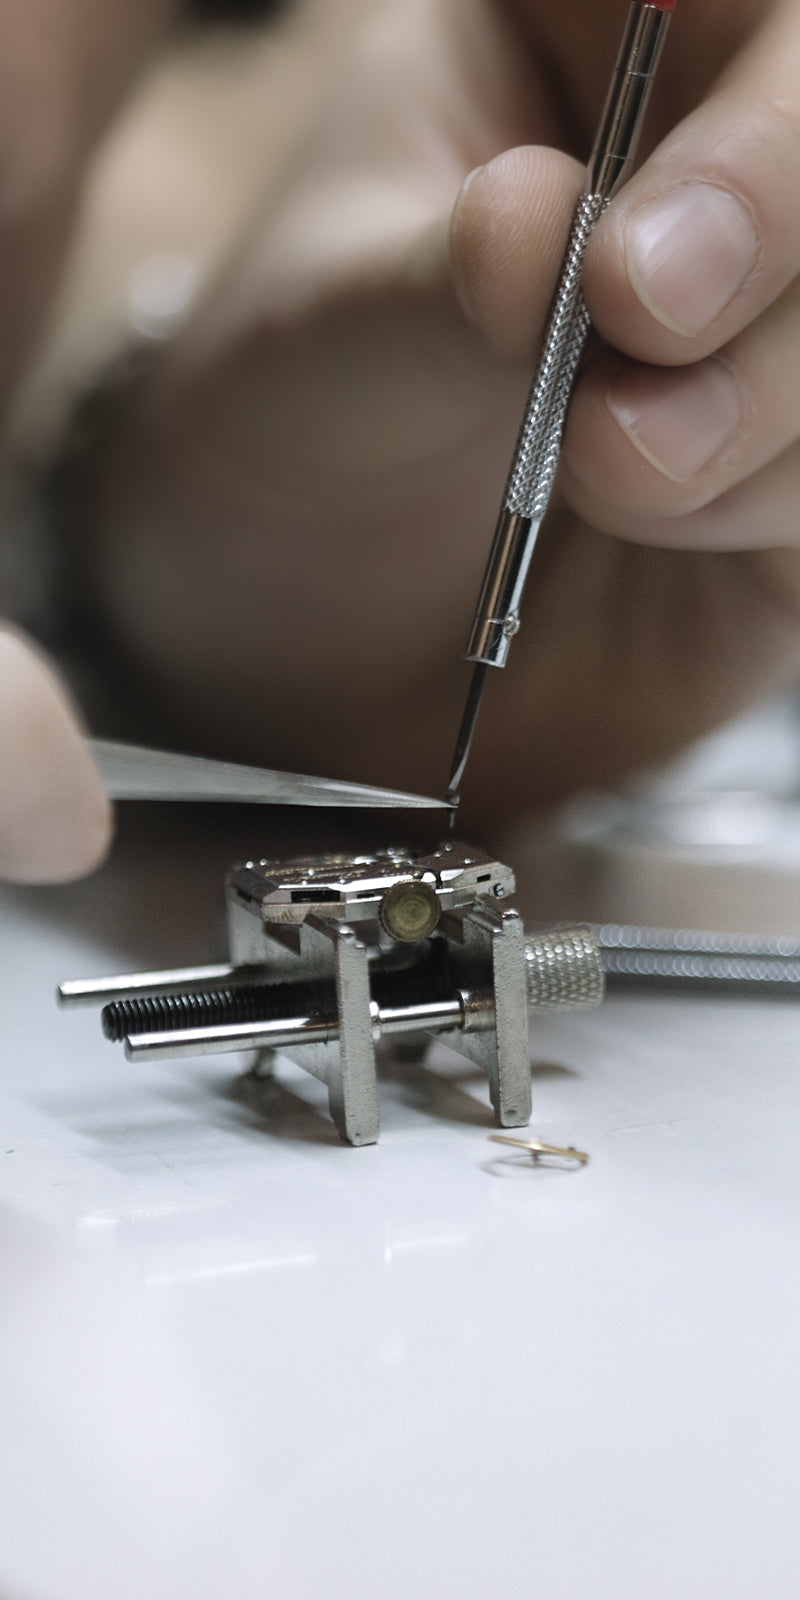 Specialty watch service repairs